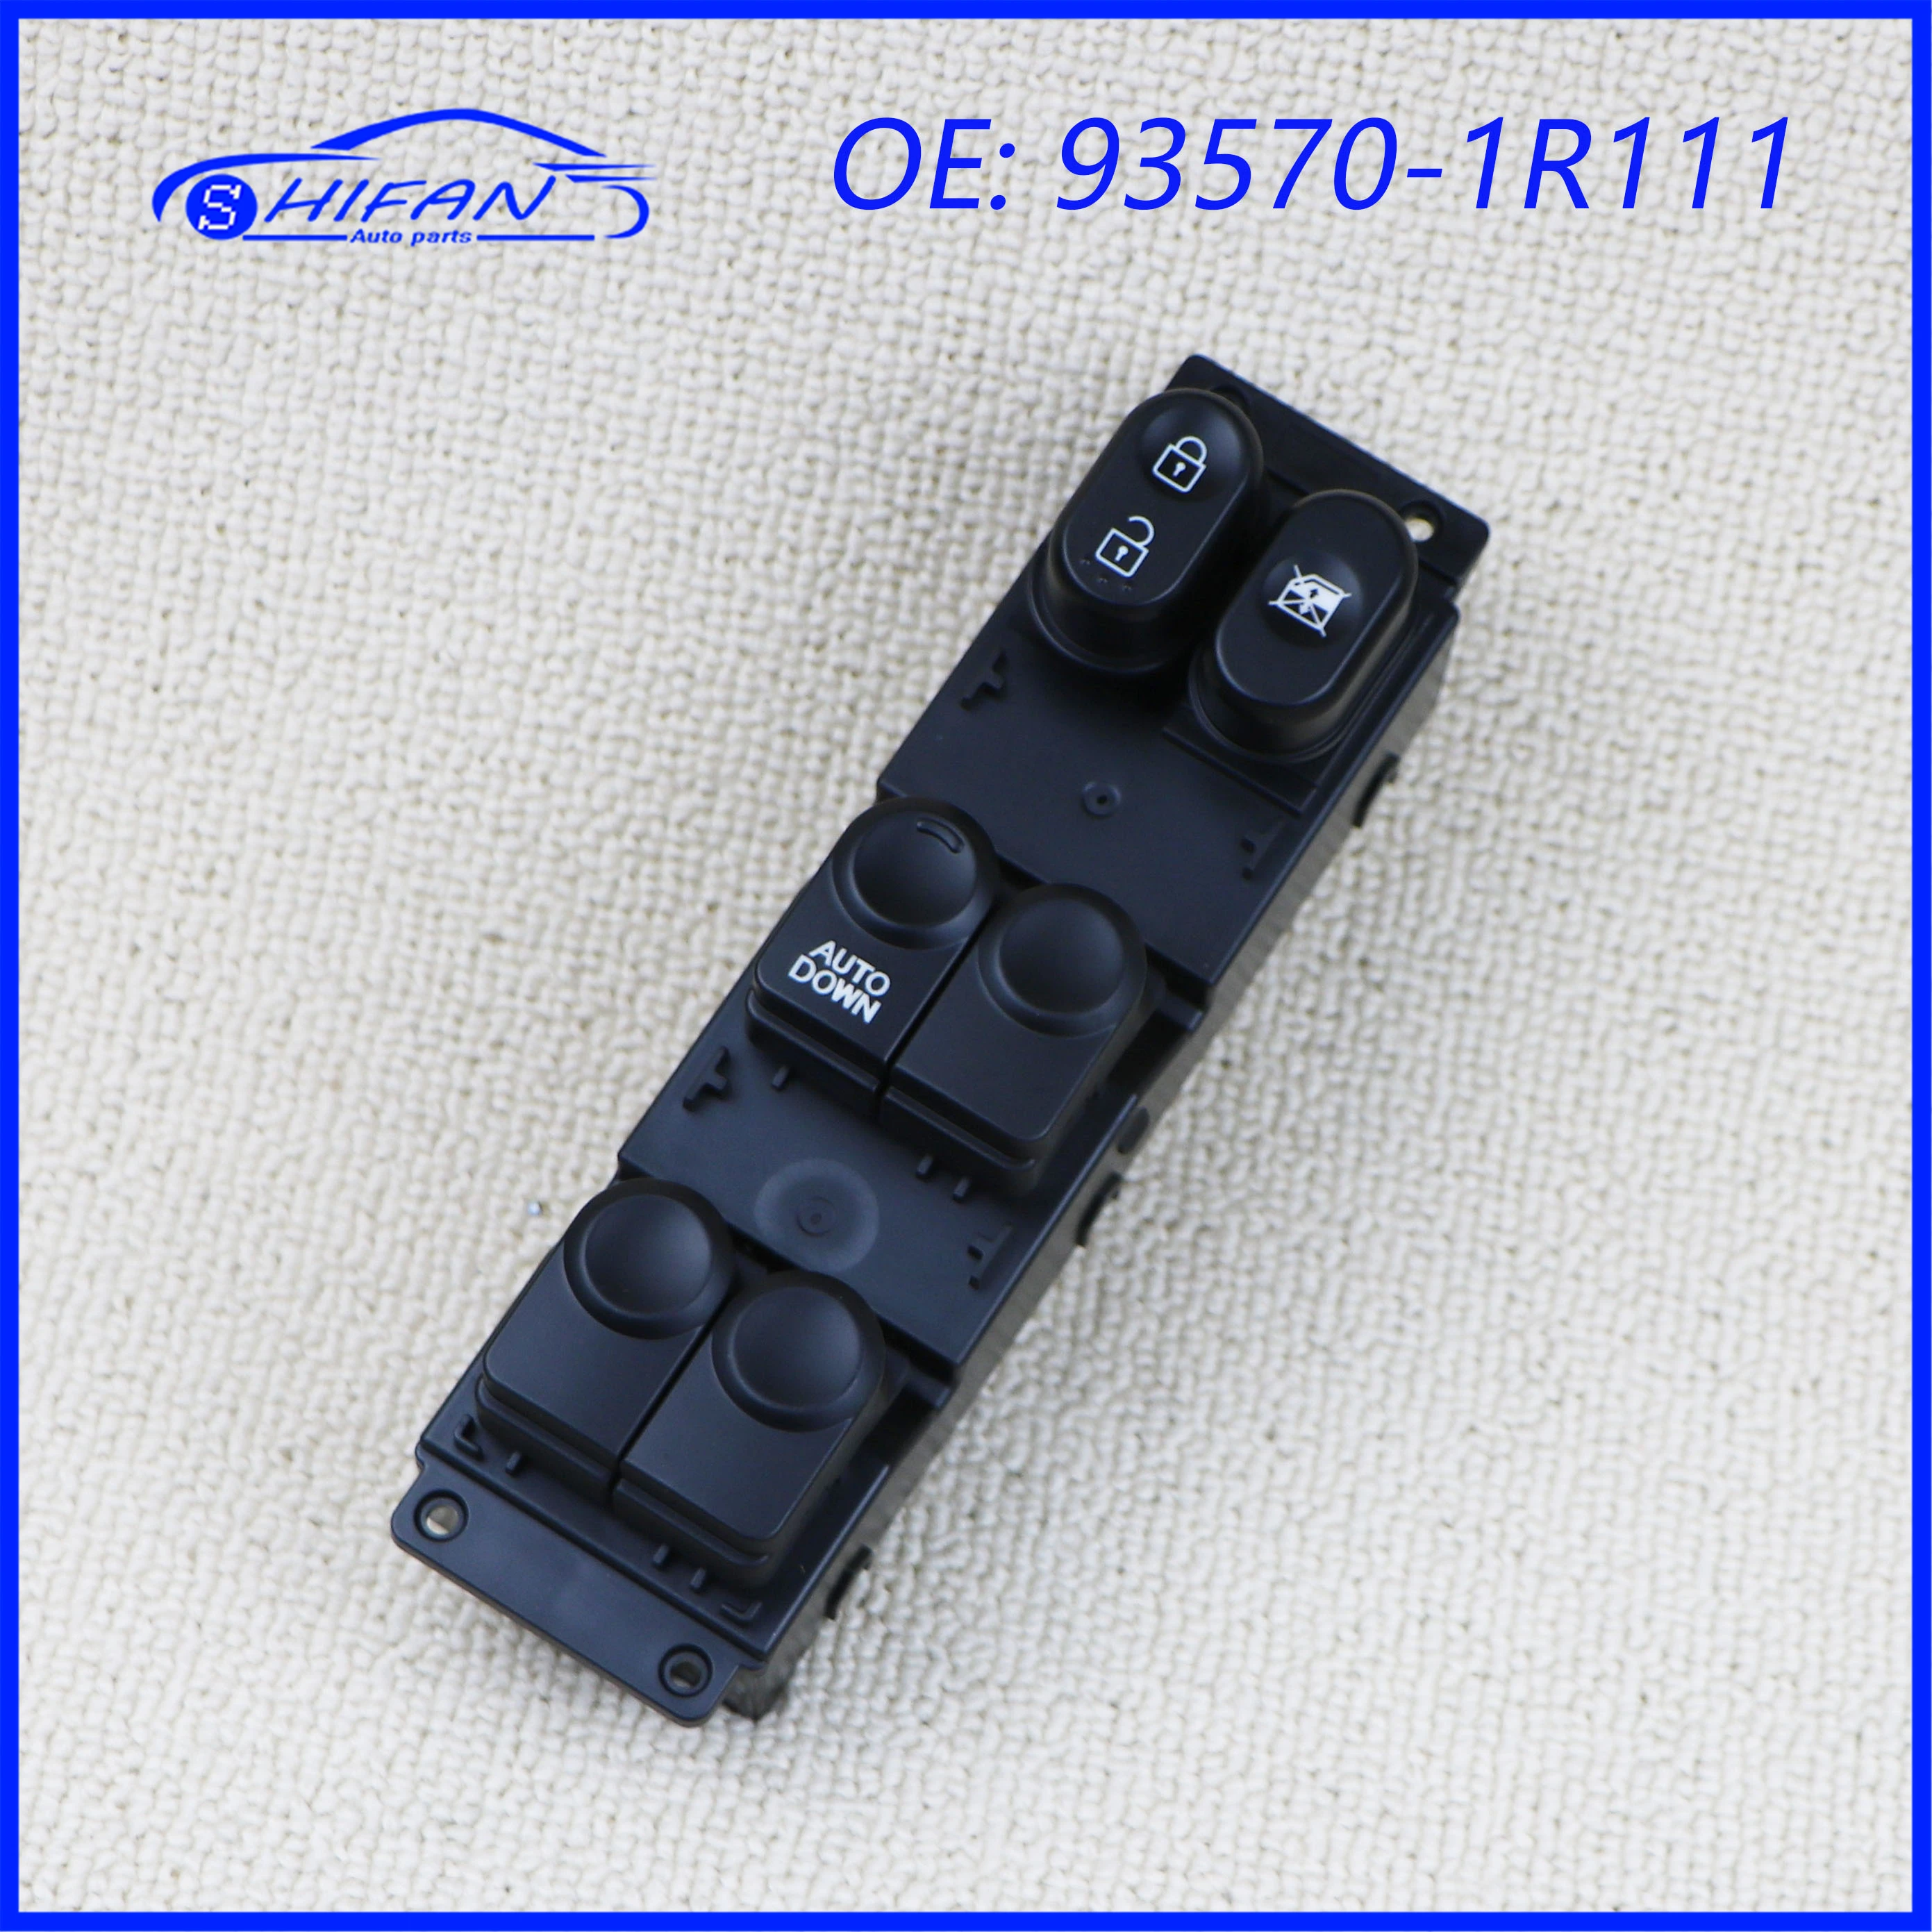 93570-1R111 Car Power Window Control Switch Electric Switch For Hyundai Accent 2010-2017 Car Accessories 935701R111 for hyundai i30 i30cw 2008 2011 car front rear electric power window switch lhd 93570 2l010 93570 2l000 93580 2l000 93580 1z000